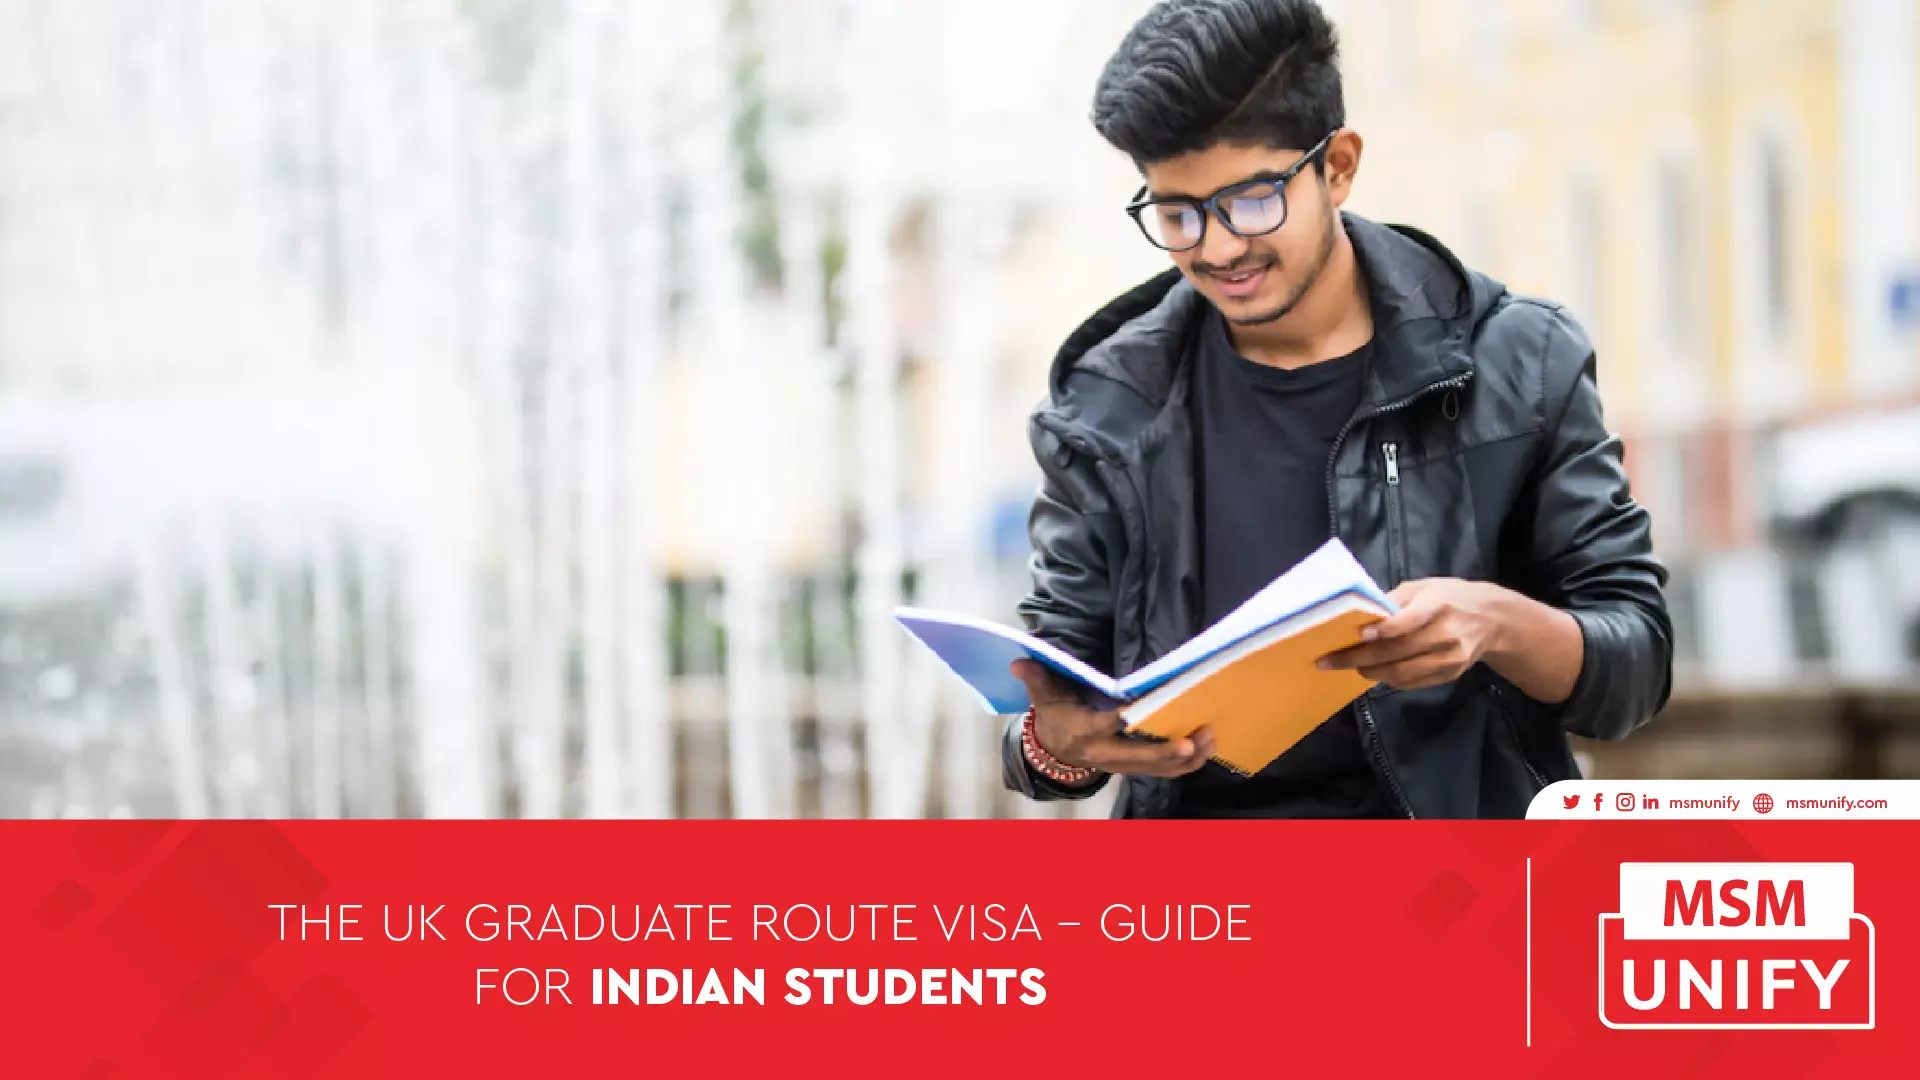 010623 MSM Unify The UK Graduate Route Visa Guide for Indian Students 01